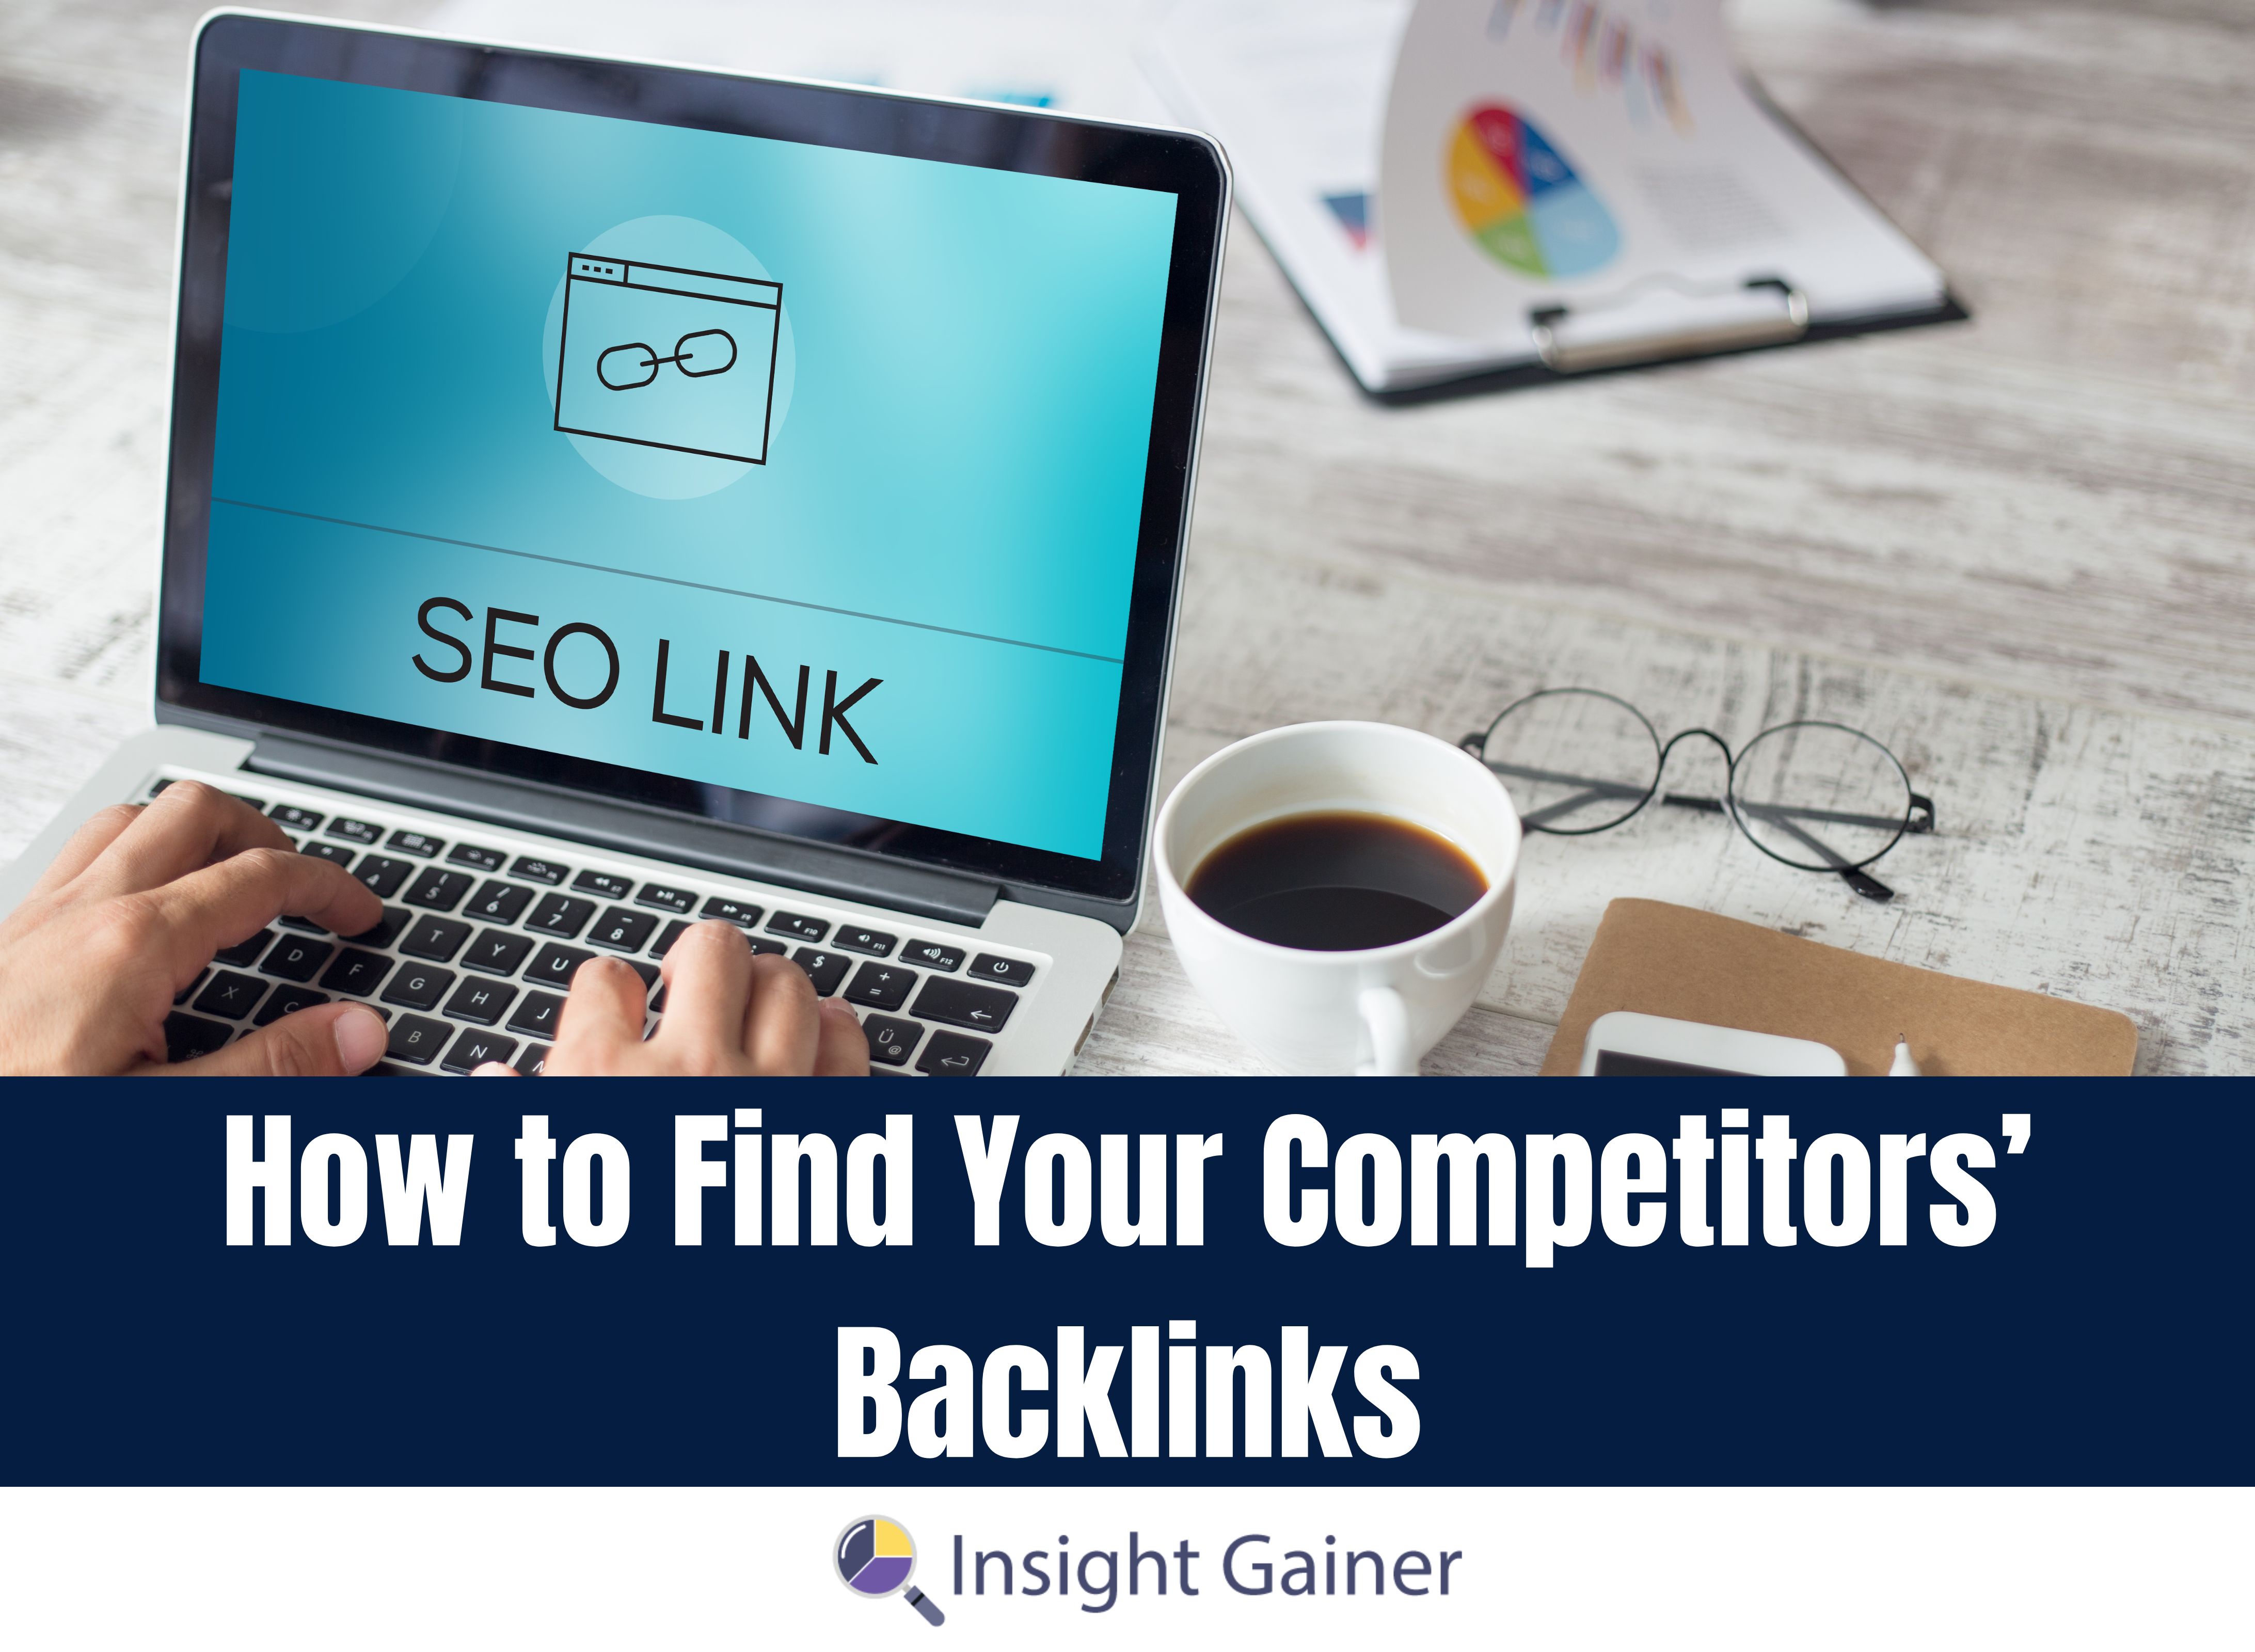 Competitors Backlinks, Insight Gainer